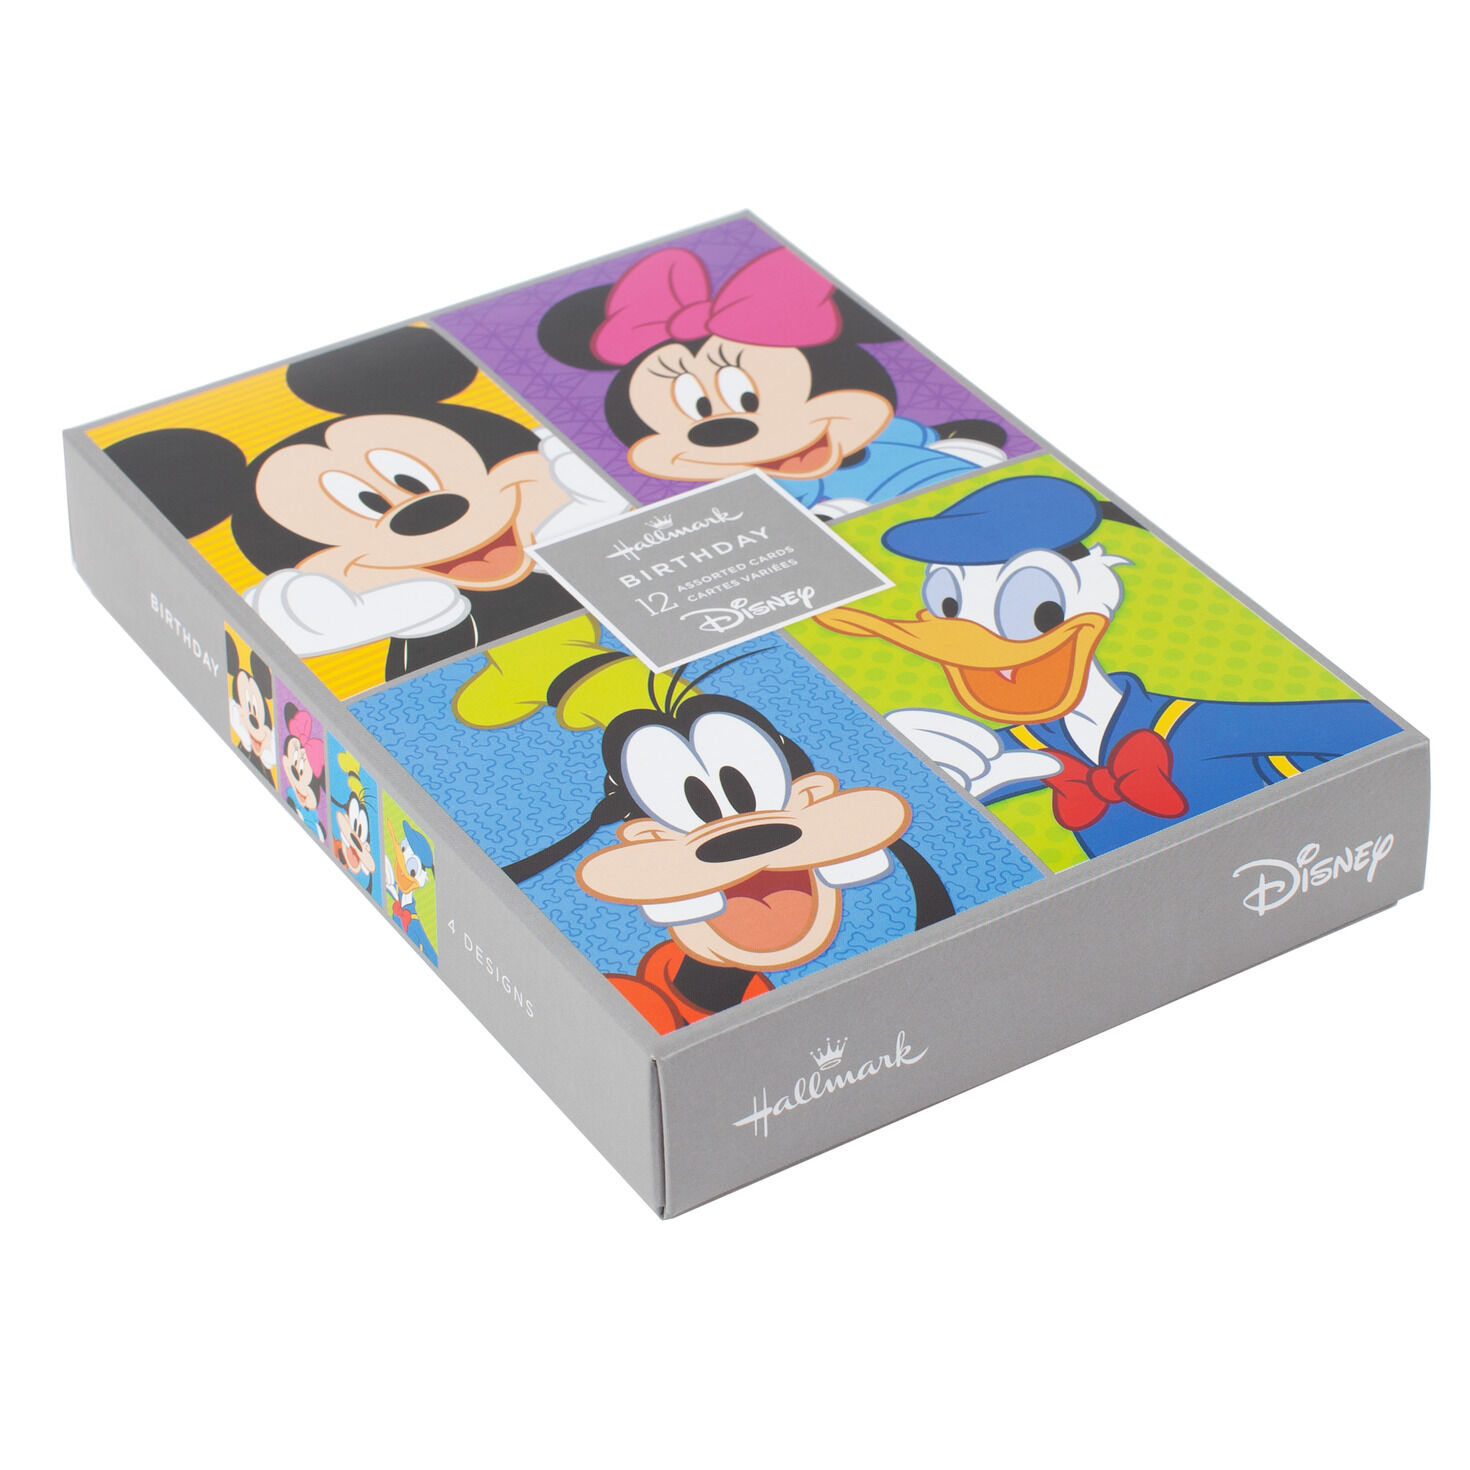 Minnie & Pluto & limited card holder 2 Disney Christmas Gift Cards 2013 Mickey 